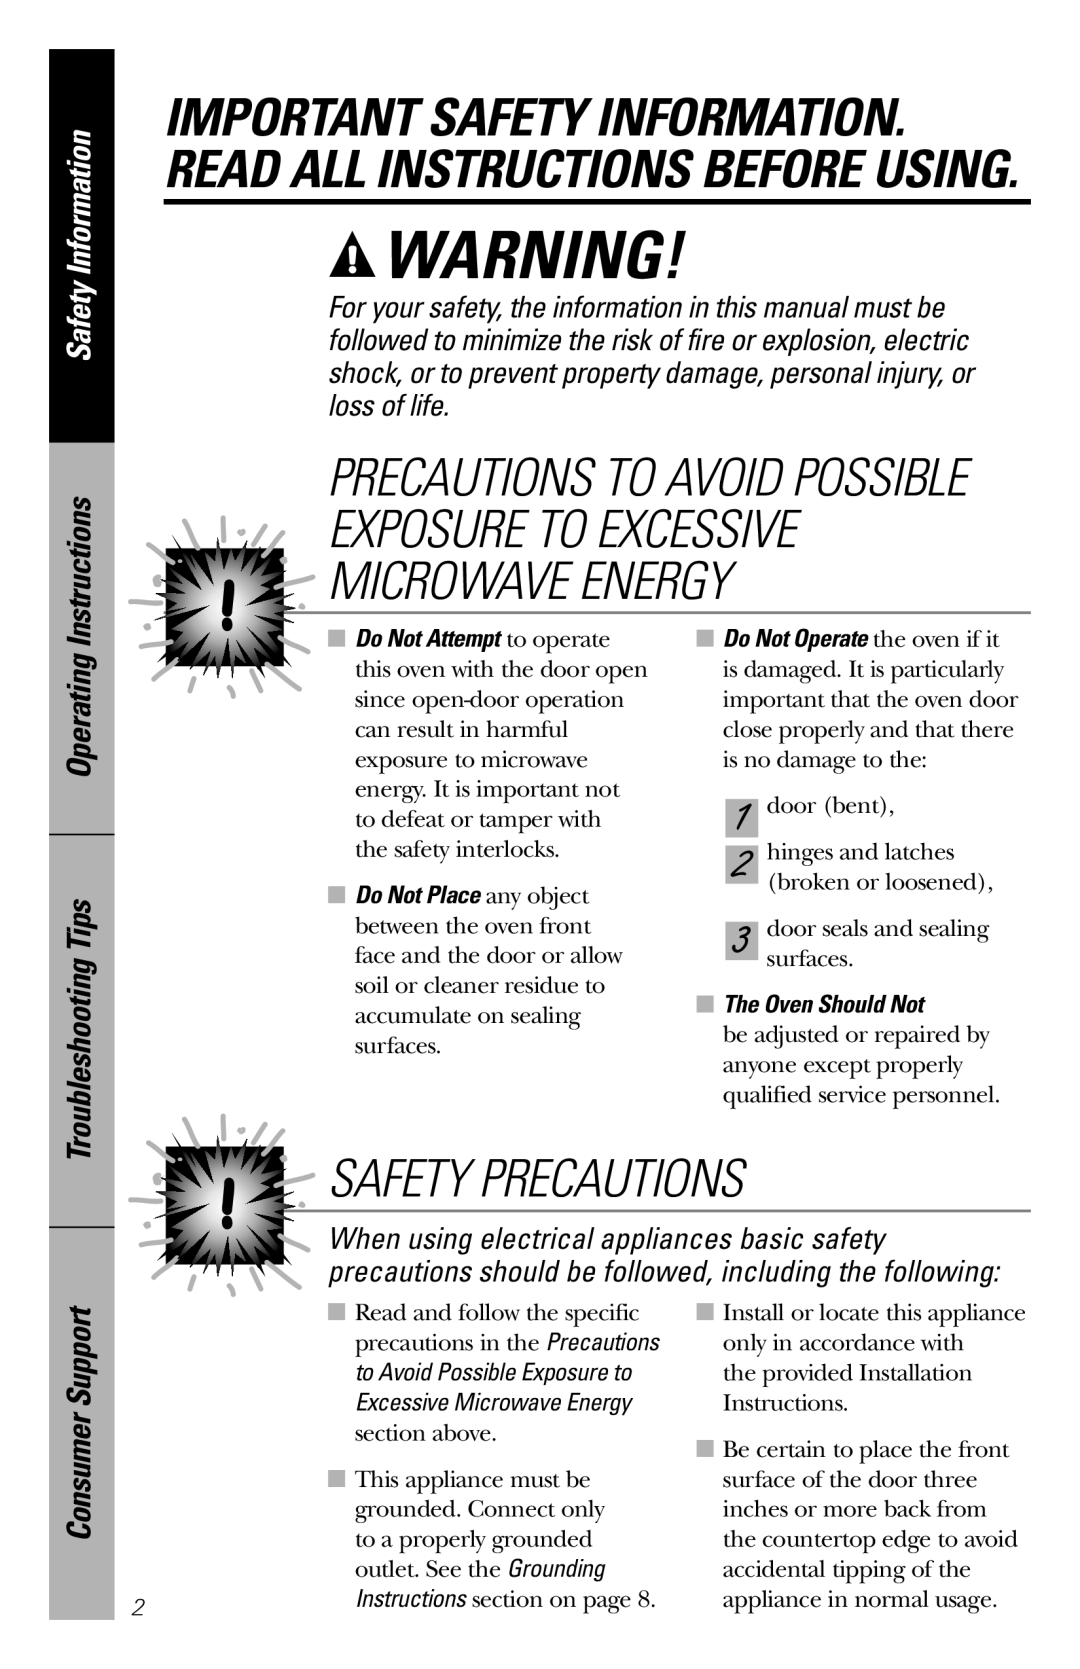 GE JES1036 Safety Precautions, Safety Information, Instructions, Operating Troubleshooting Tips, Consumer Support 